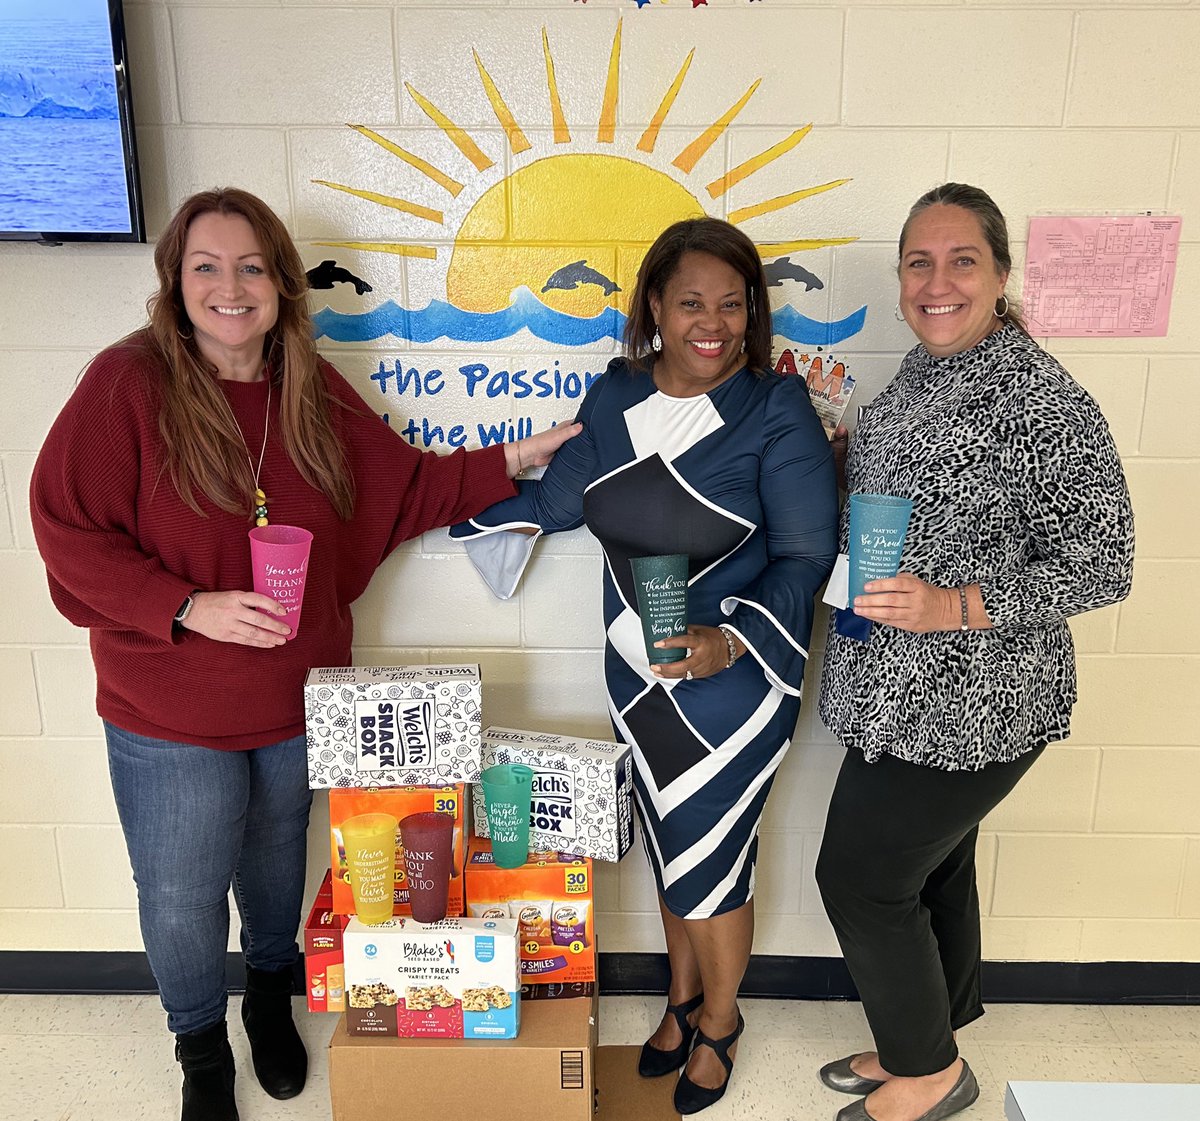 Thank you Dr. April Johnson for bringing goodies for our students and staff! You are appreciated!